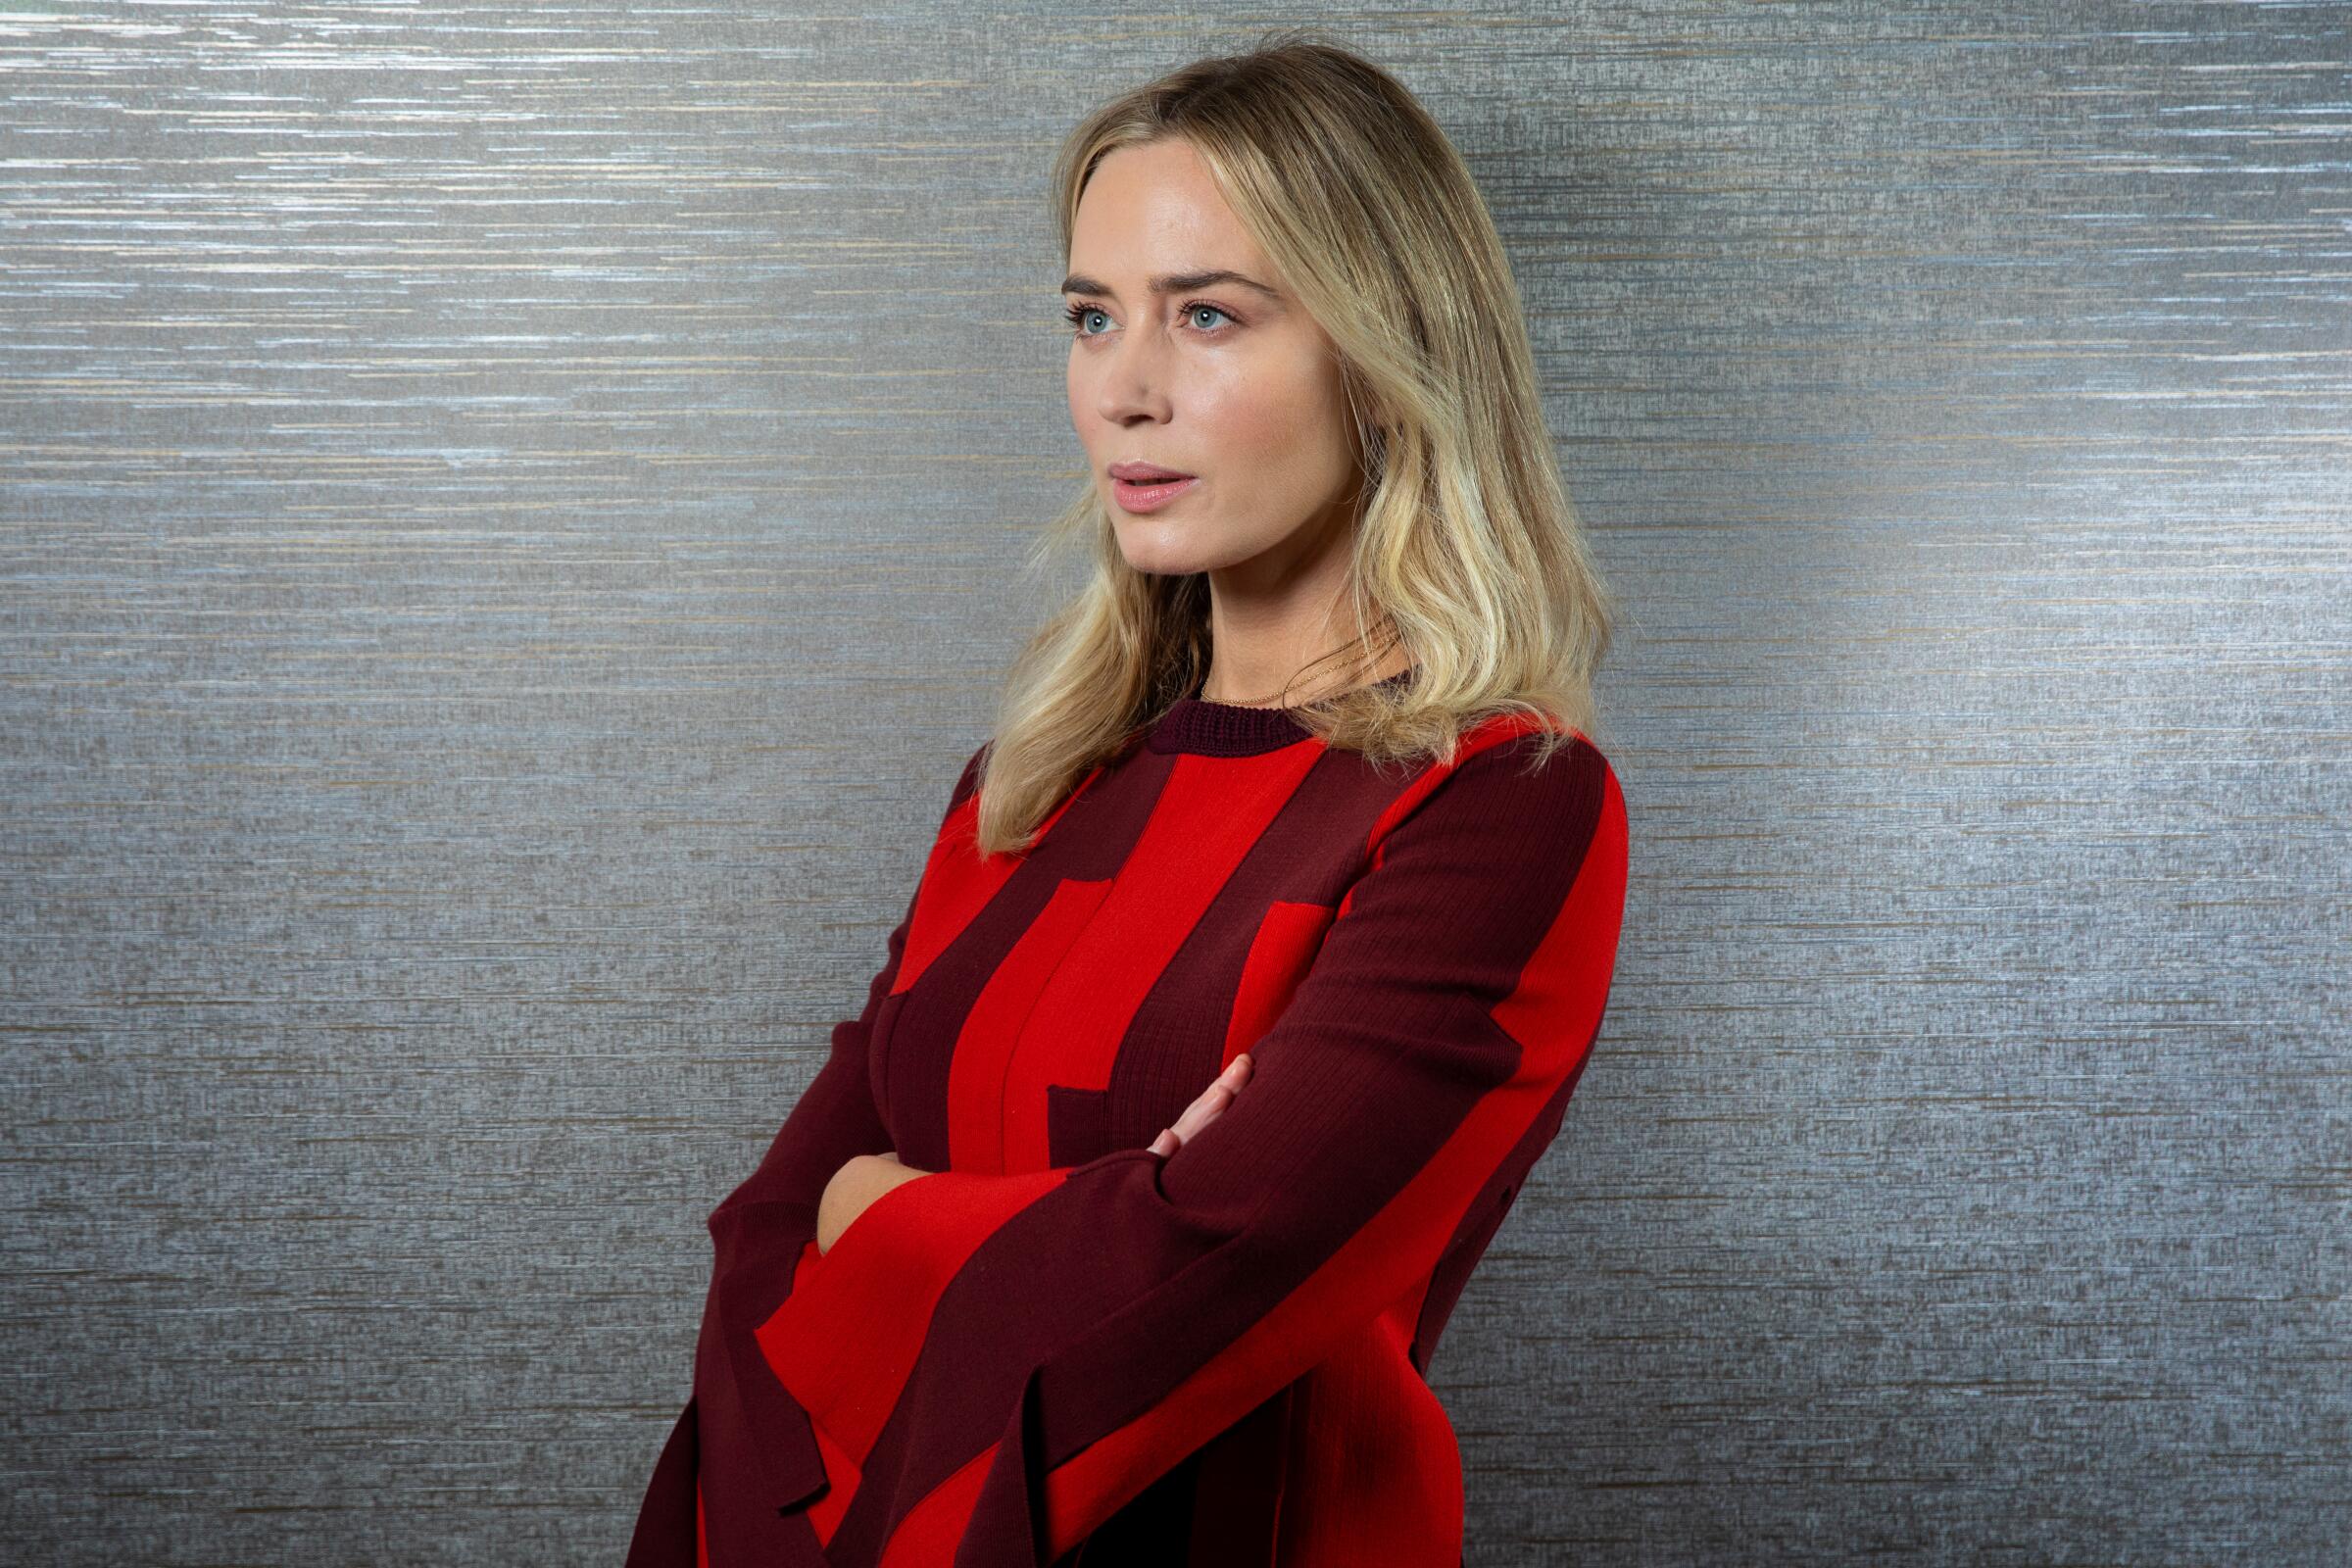 Emily Blunt stands with arms crossed, wearing a red and plum colorblock dress.